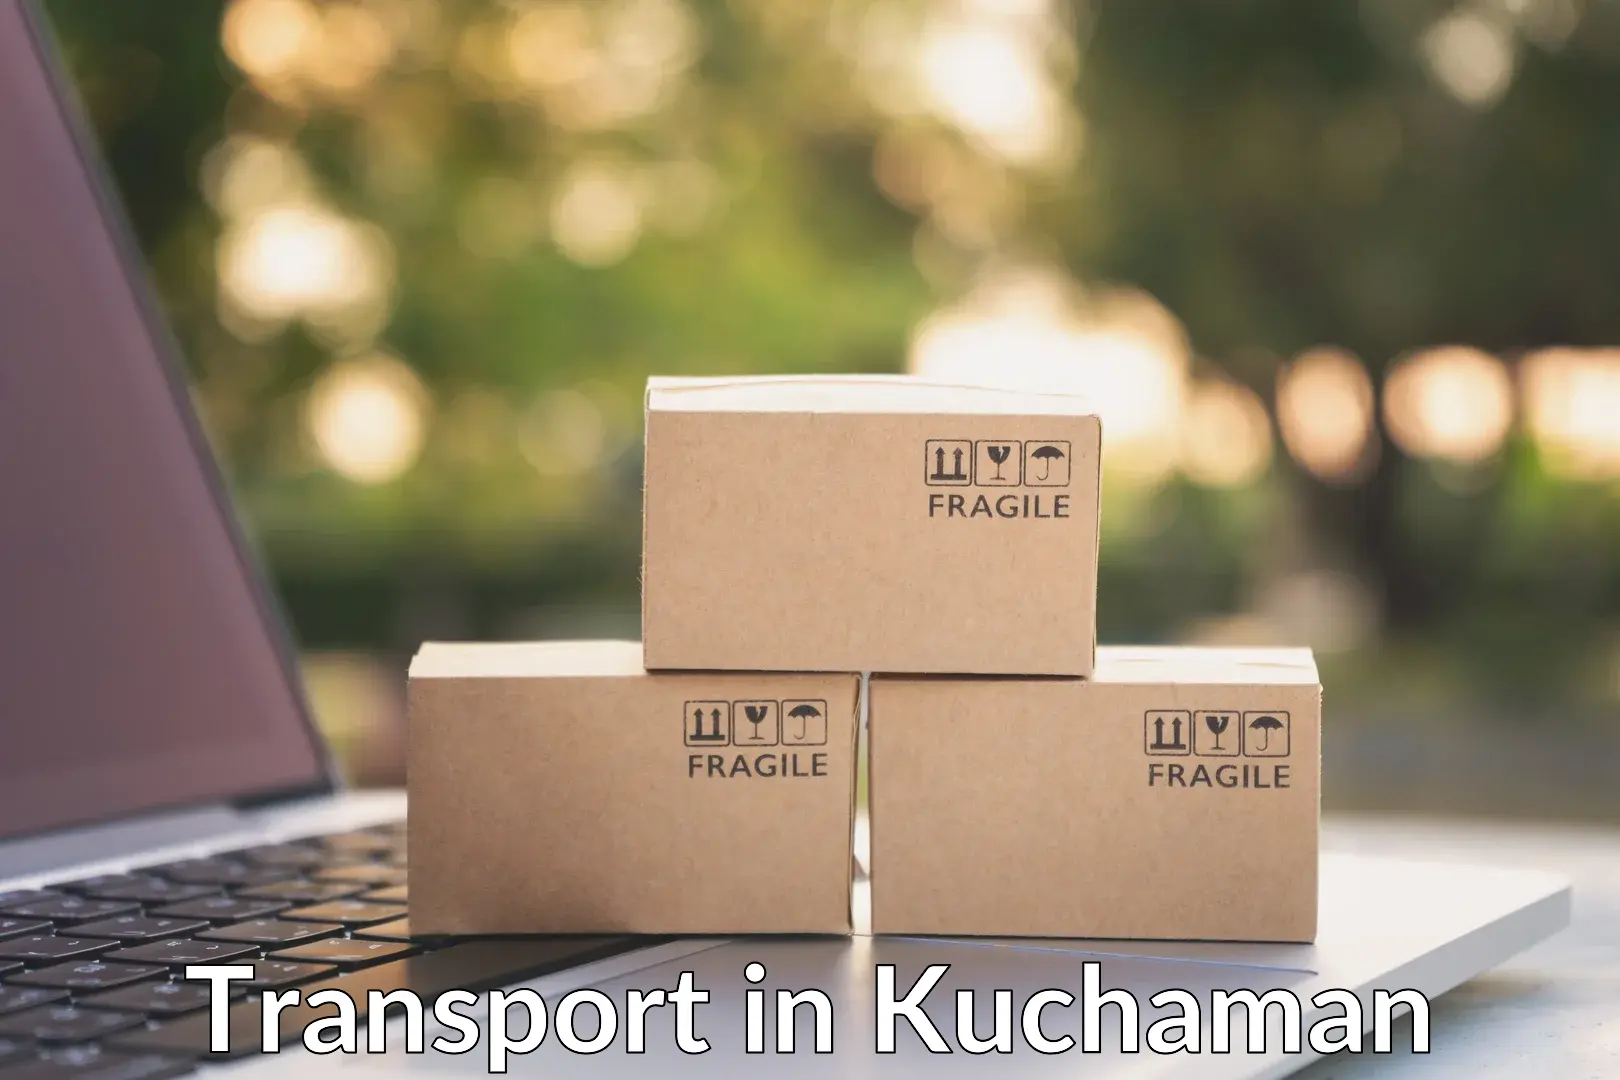 Parcel transport services in Kuchaman